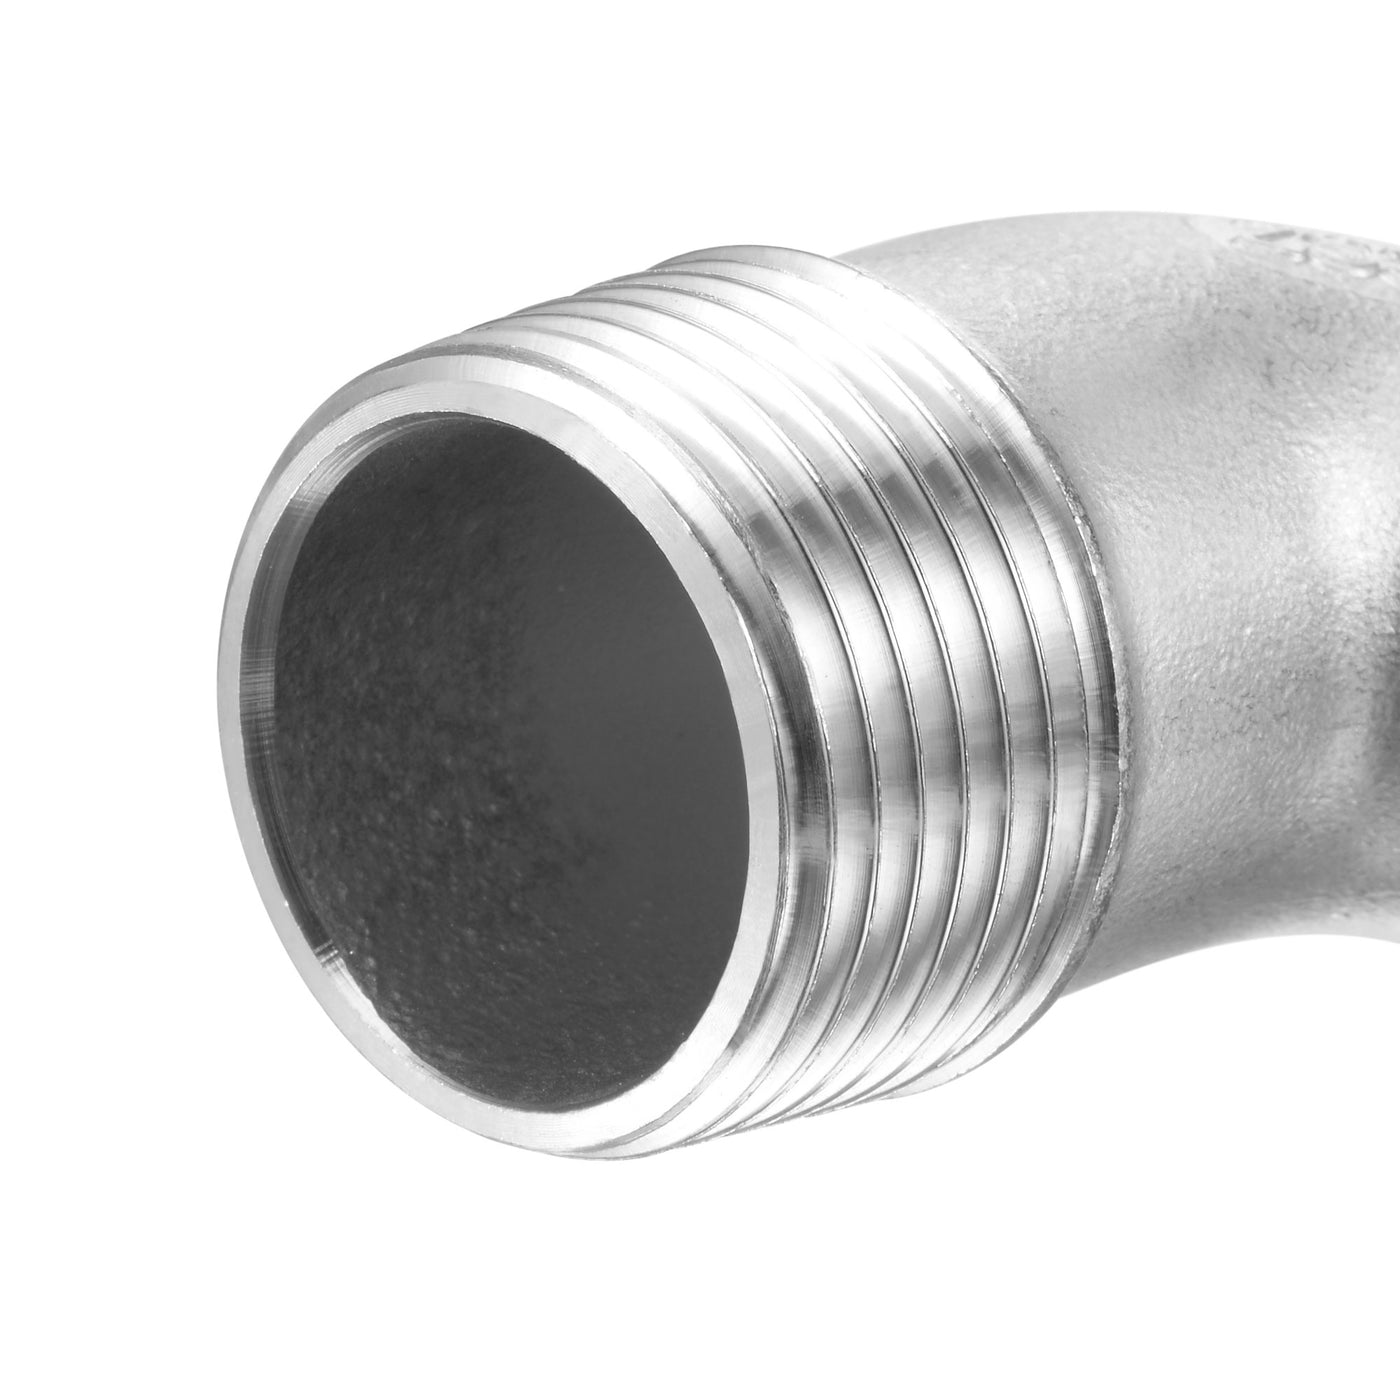 Uxcell Uxcell Stainless Steel Hose Barb Fitting Elbow 25mm x G1 Male Pipe Connector